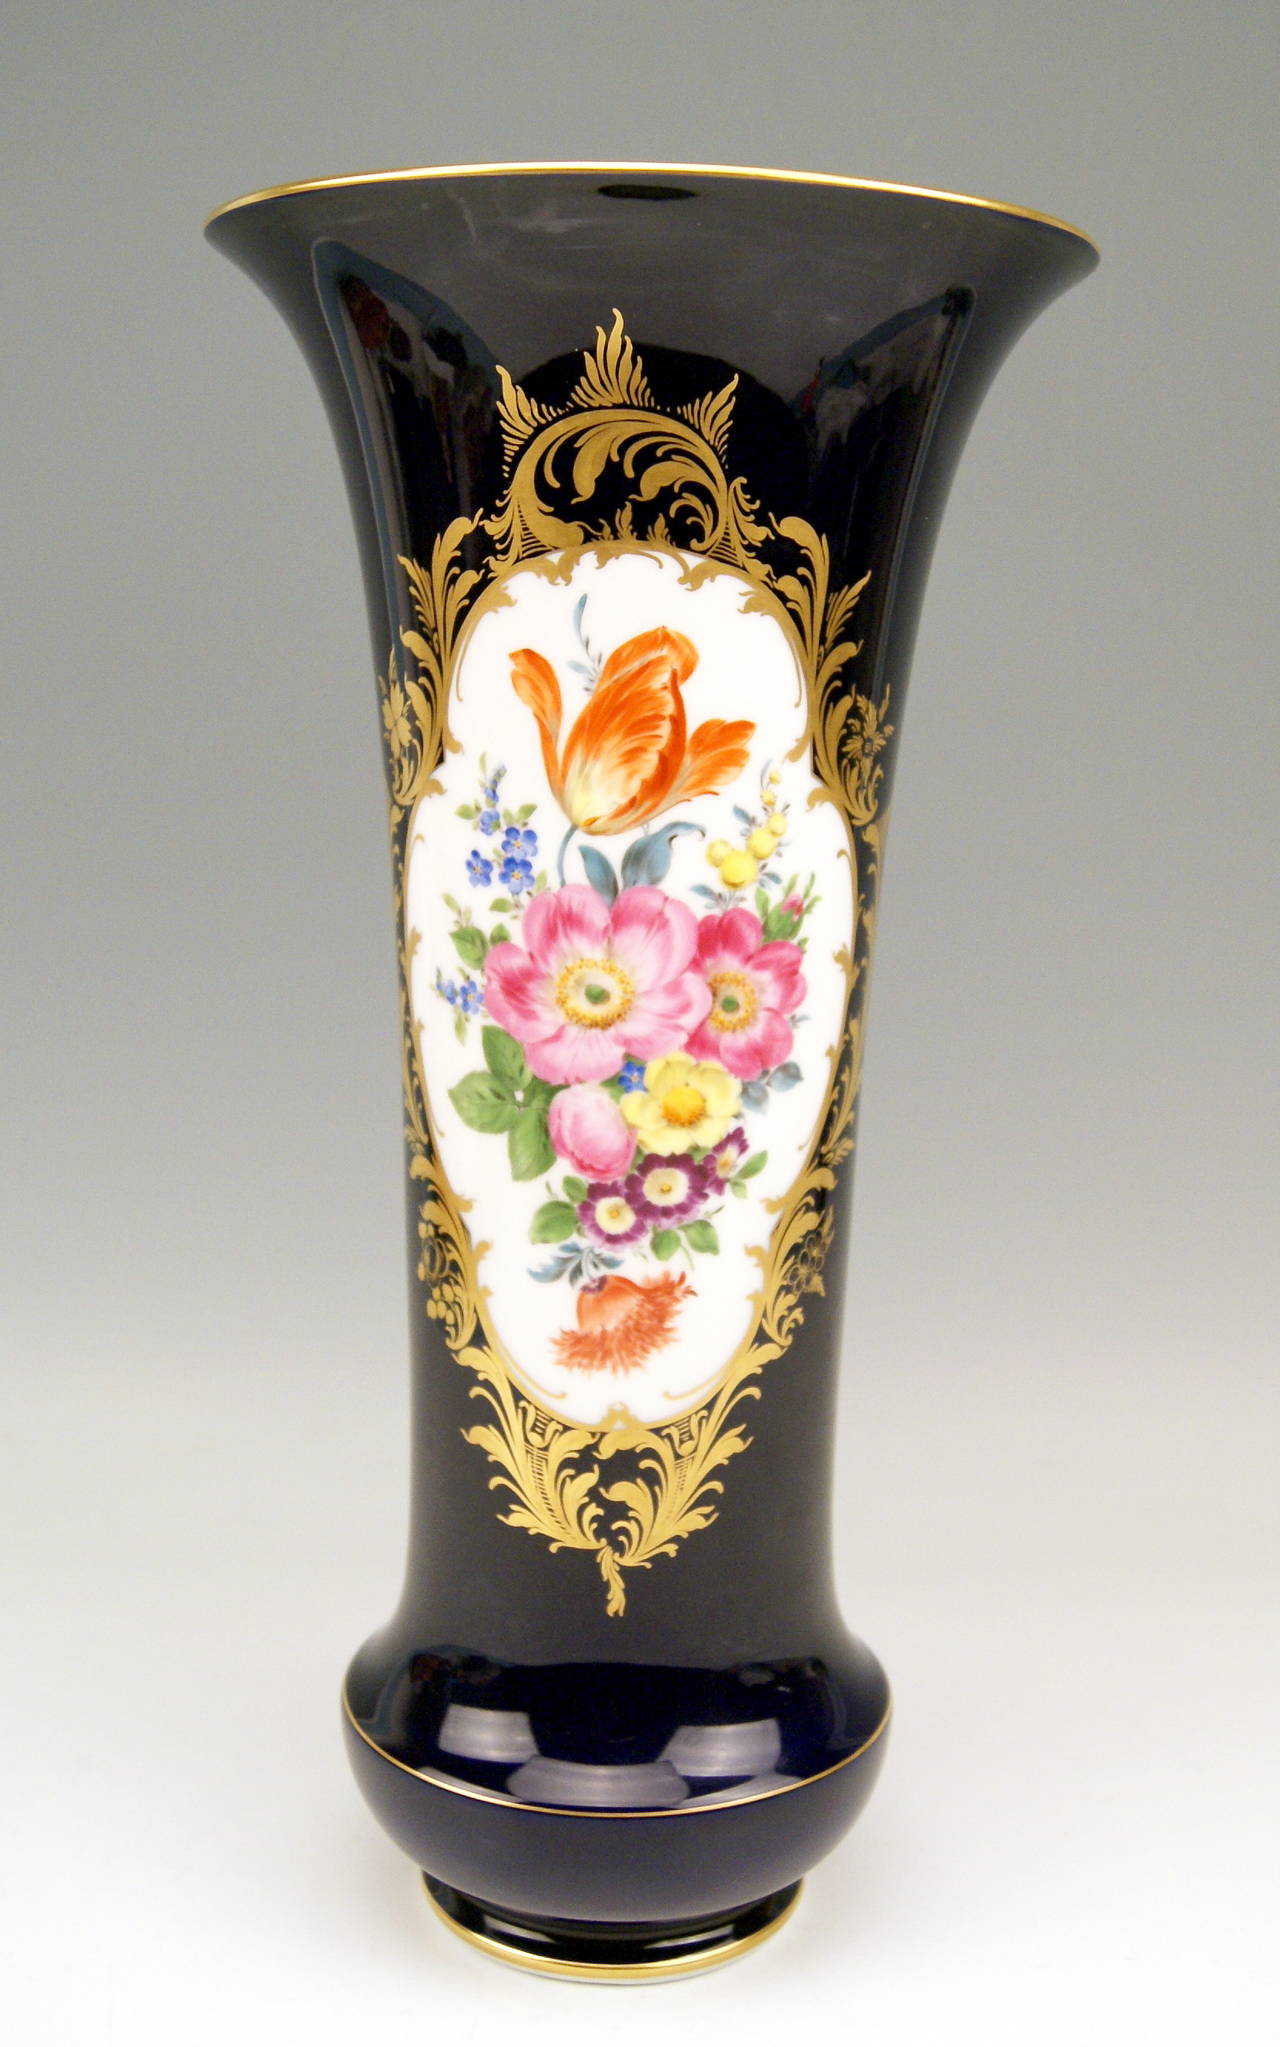 GORGEOUS TALL COBALT BLUE VASE OF FUNNELED FORM TYPE

MANUFACTORY:    MEISSEN
DATING:         made middle of 20th century   
MATERIAL:     WHITE PORCELAIN, GLOSSY FINISH, FINEST FLOWER PAINTING

This stunning  MEISSEN VASE of FUNNELED FORM